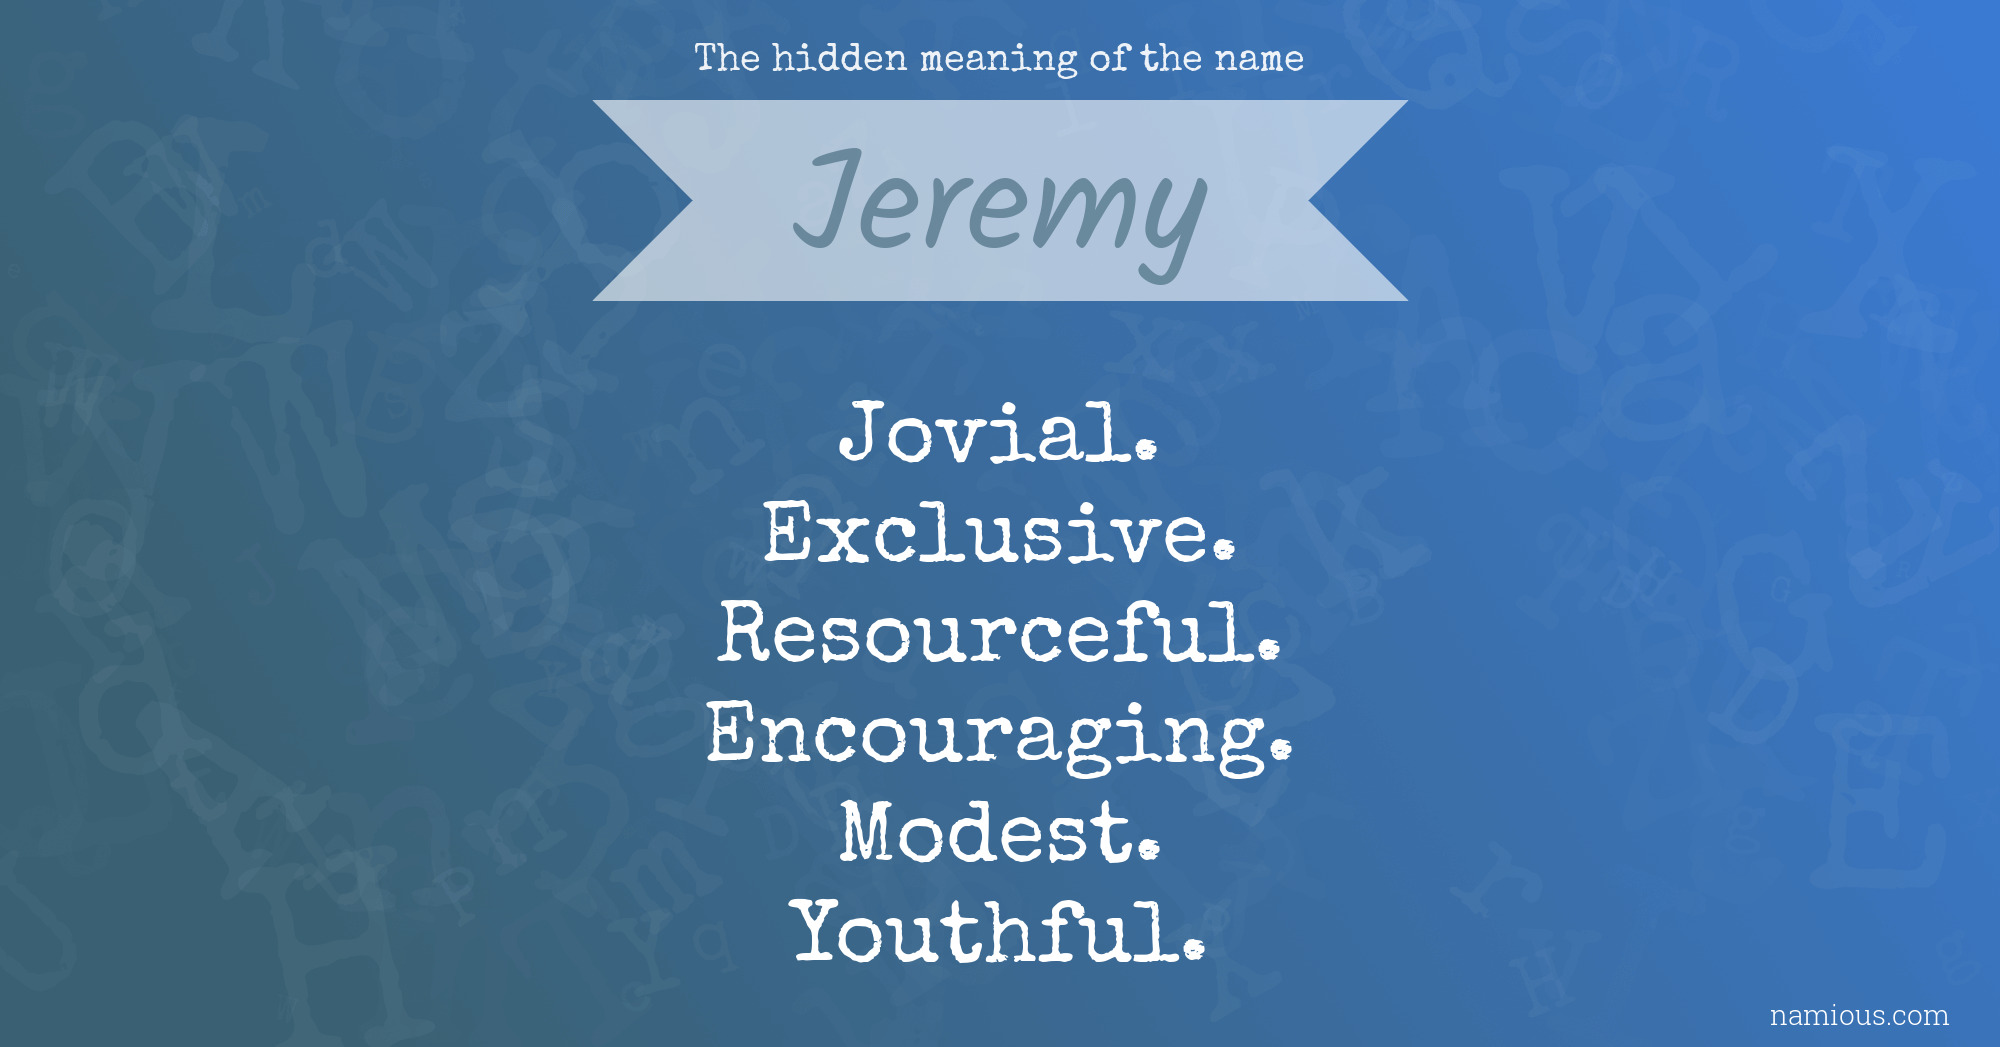 The hidden meaning of the name Jeremy